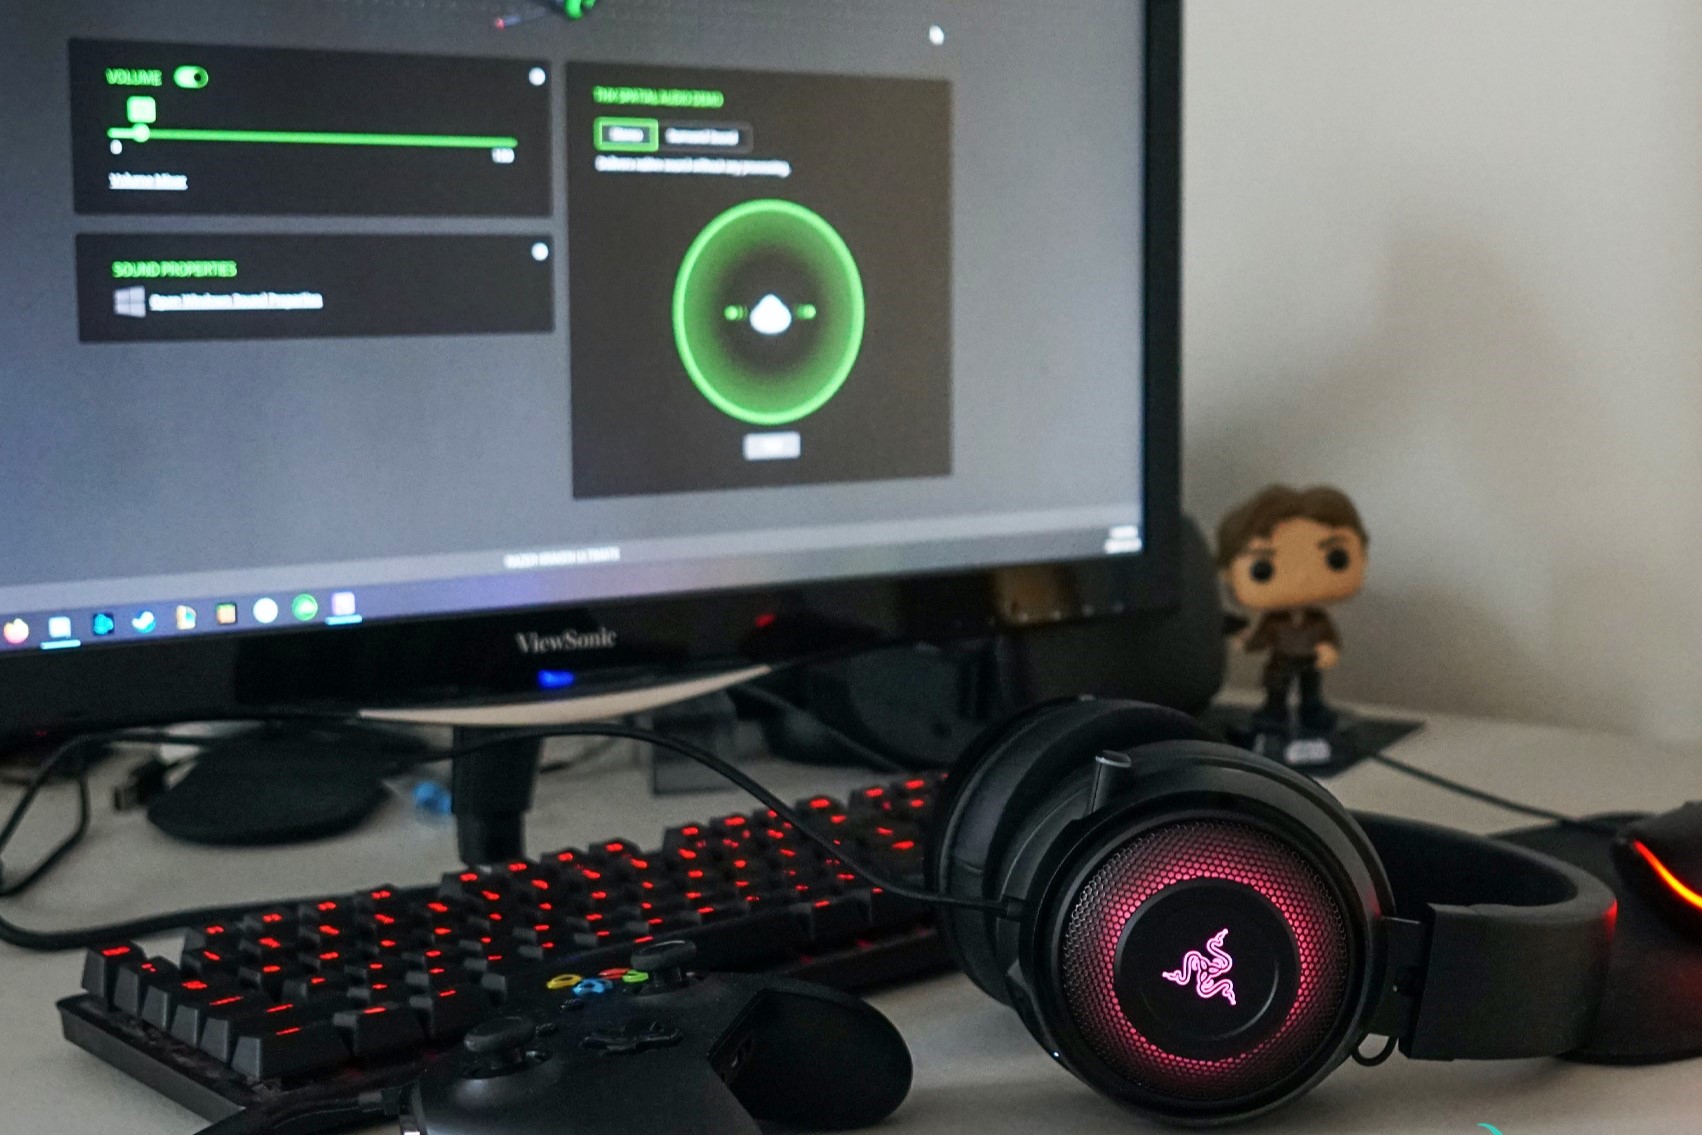 setting-up-a-razer-headset-on-your-pc